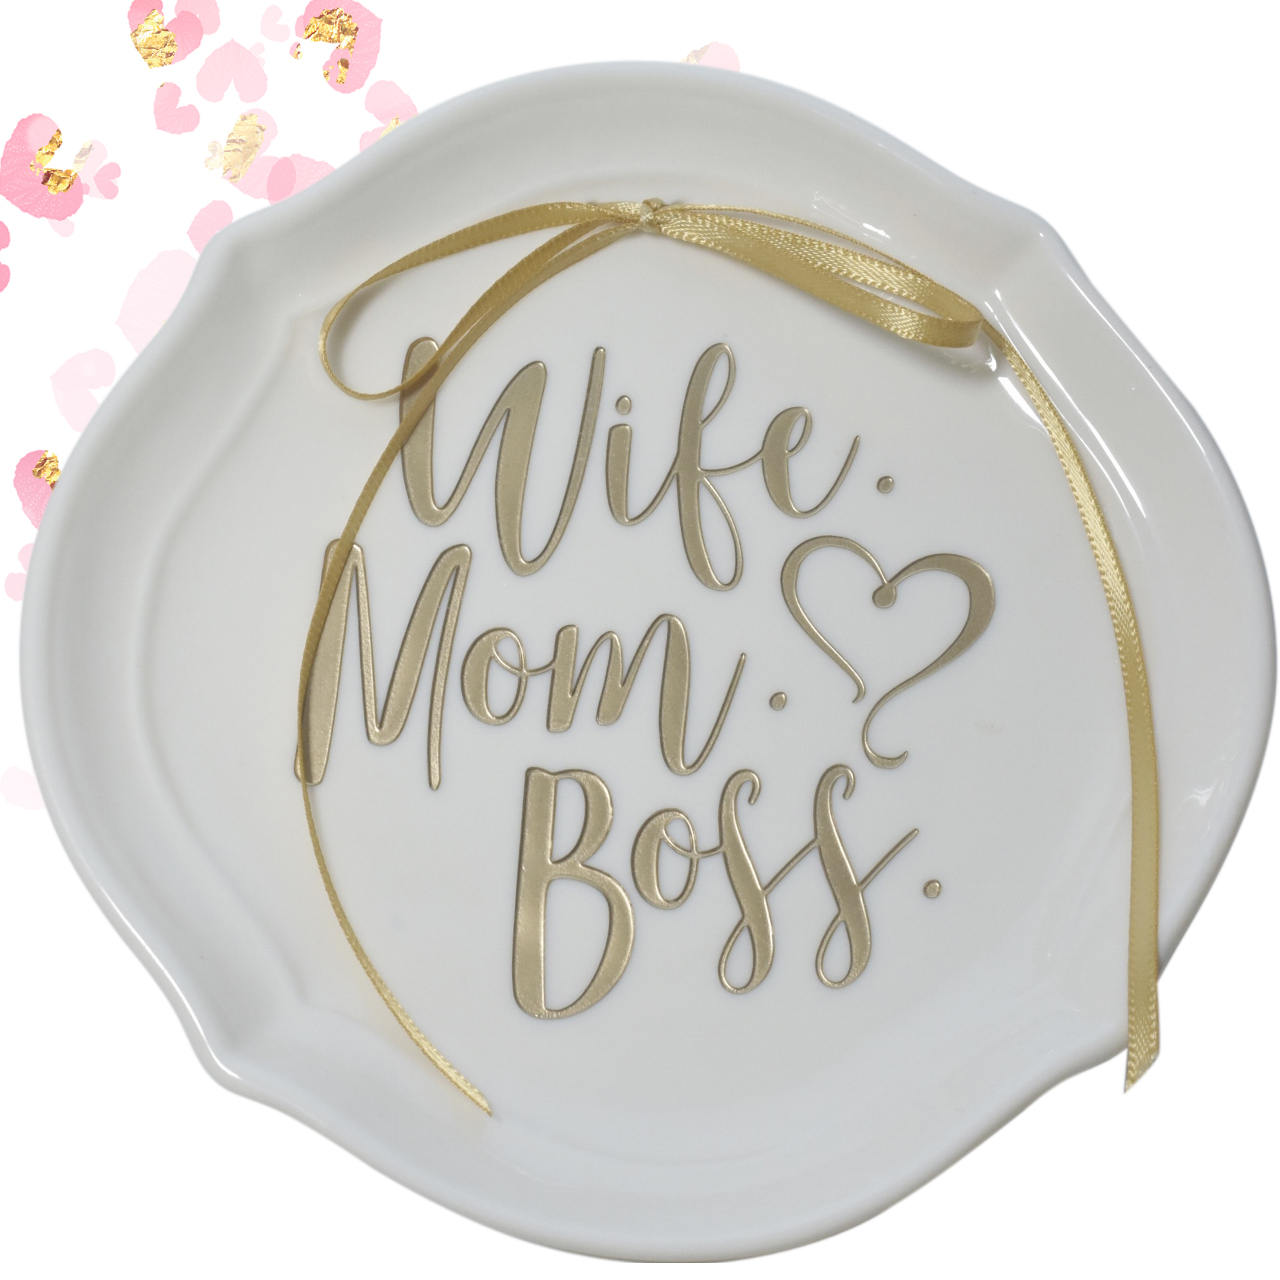 Wife Mom Boss Ring Dish, Trinket Dish, Mothers Day Gift, Boss Mom, Gift for Her, Rose Gold, Gift for Mom, Gift for Mom, Girlfriend Gift,